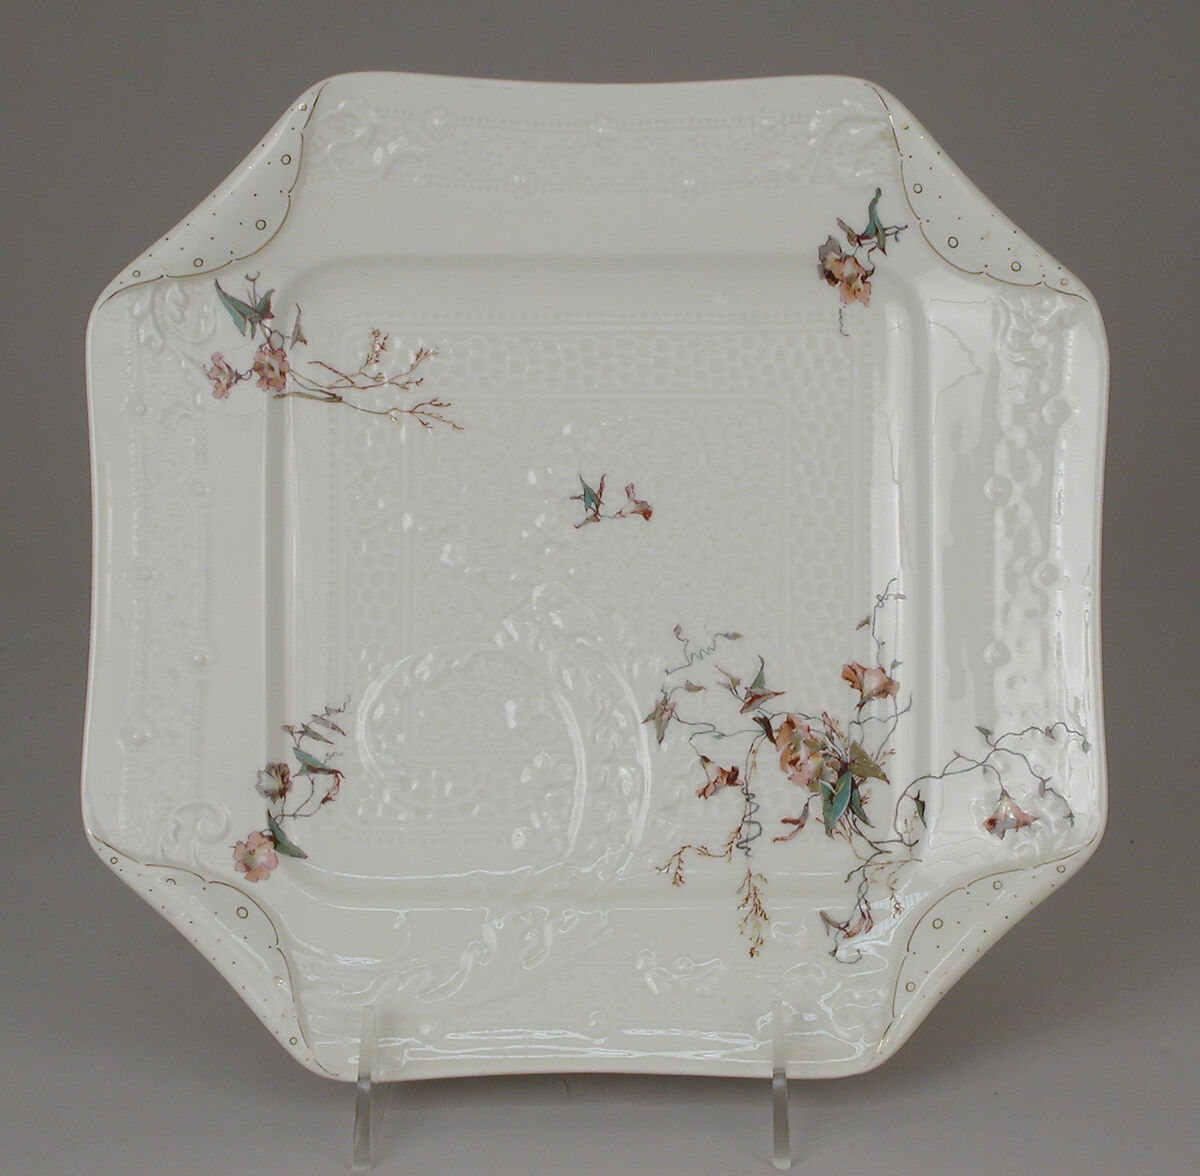 Dish, Haviland &amp; Co. (American and French, 1864–1931), Hard-paste porcelain, French, Limoges 